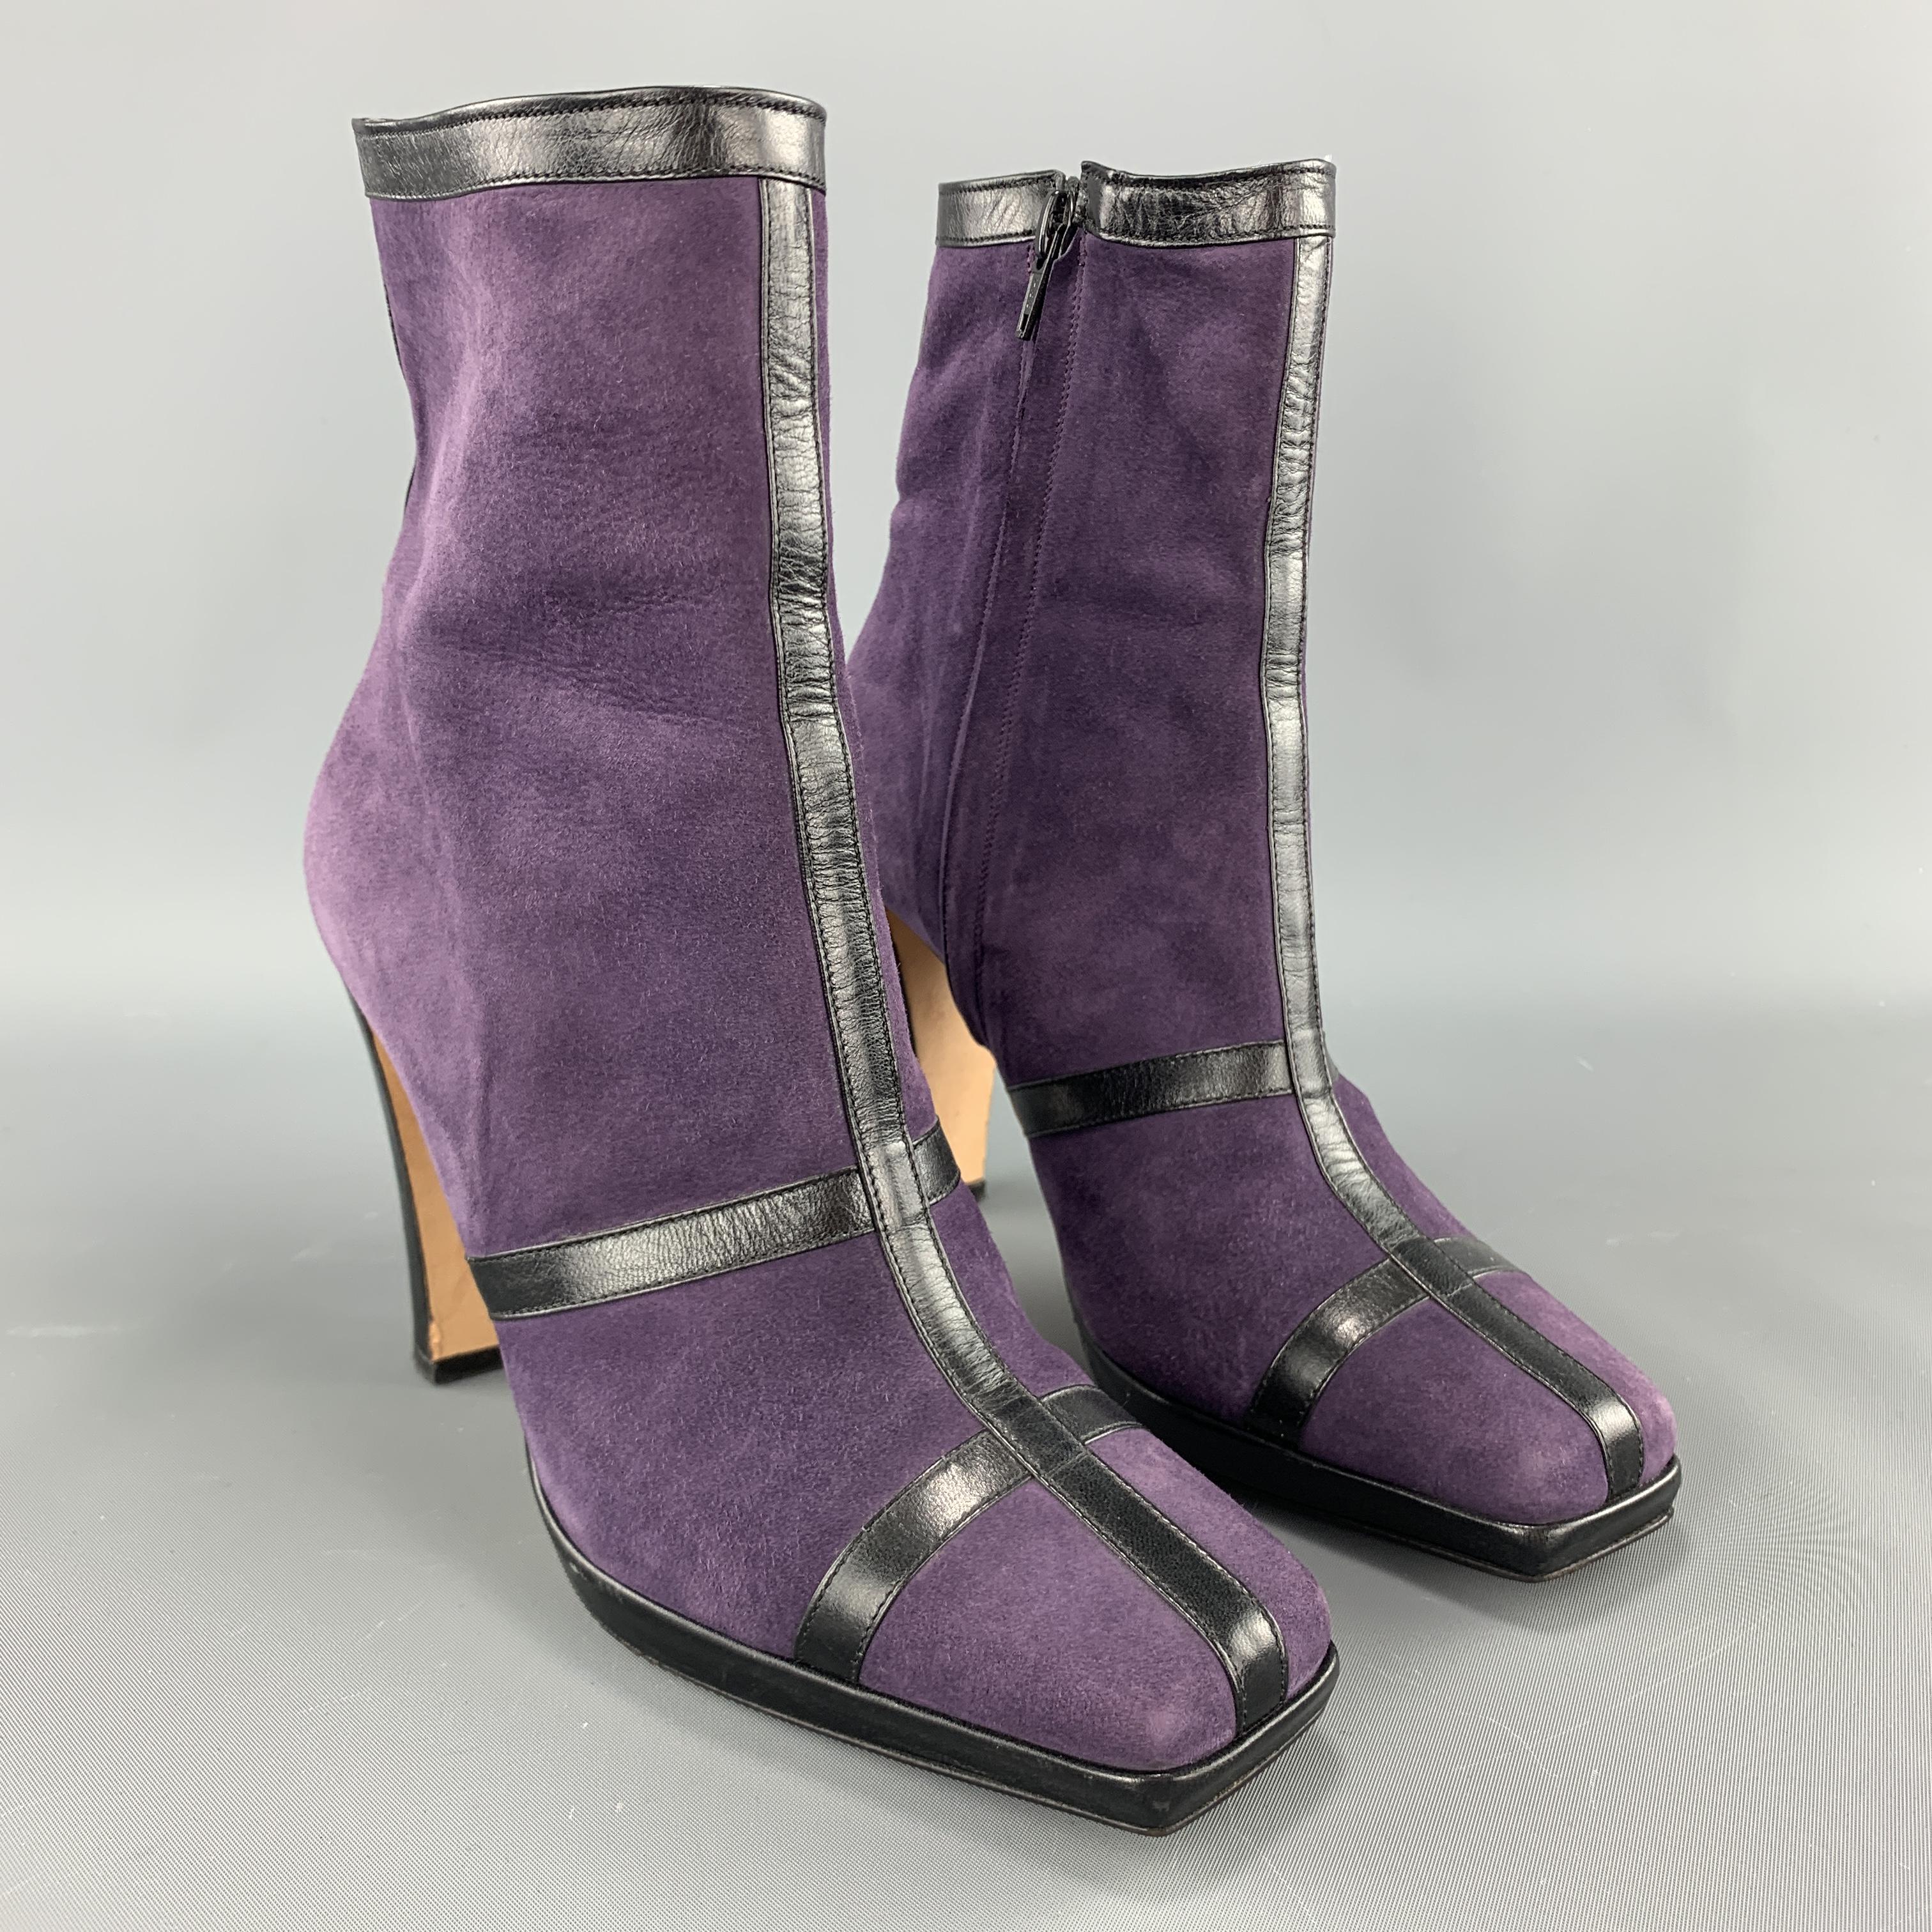 JOSEPG AZAGURY ankle booties come in purple suede with black leather stripe details, chunky covered heel, and pointed square toe. Made in Italy.

Very Good Pre-Owned Condition.
Marked: IT 37

Heel: 4 in.
Length: 5.5 in.